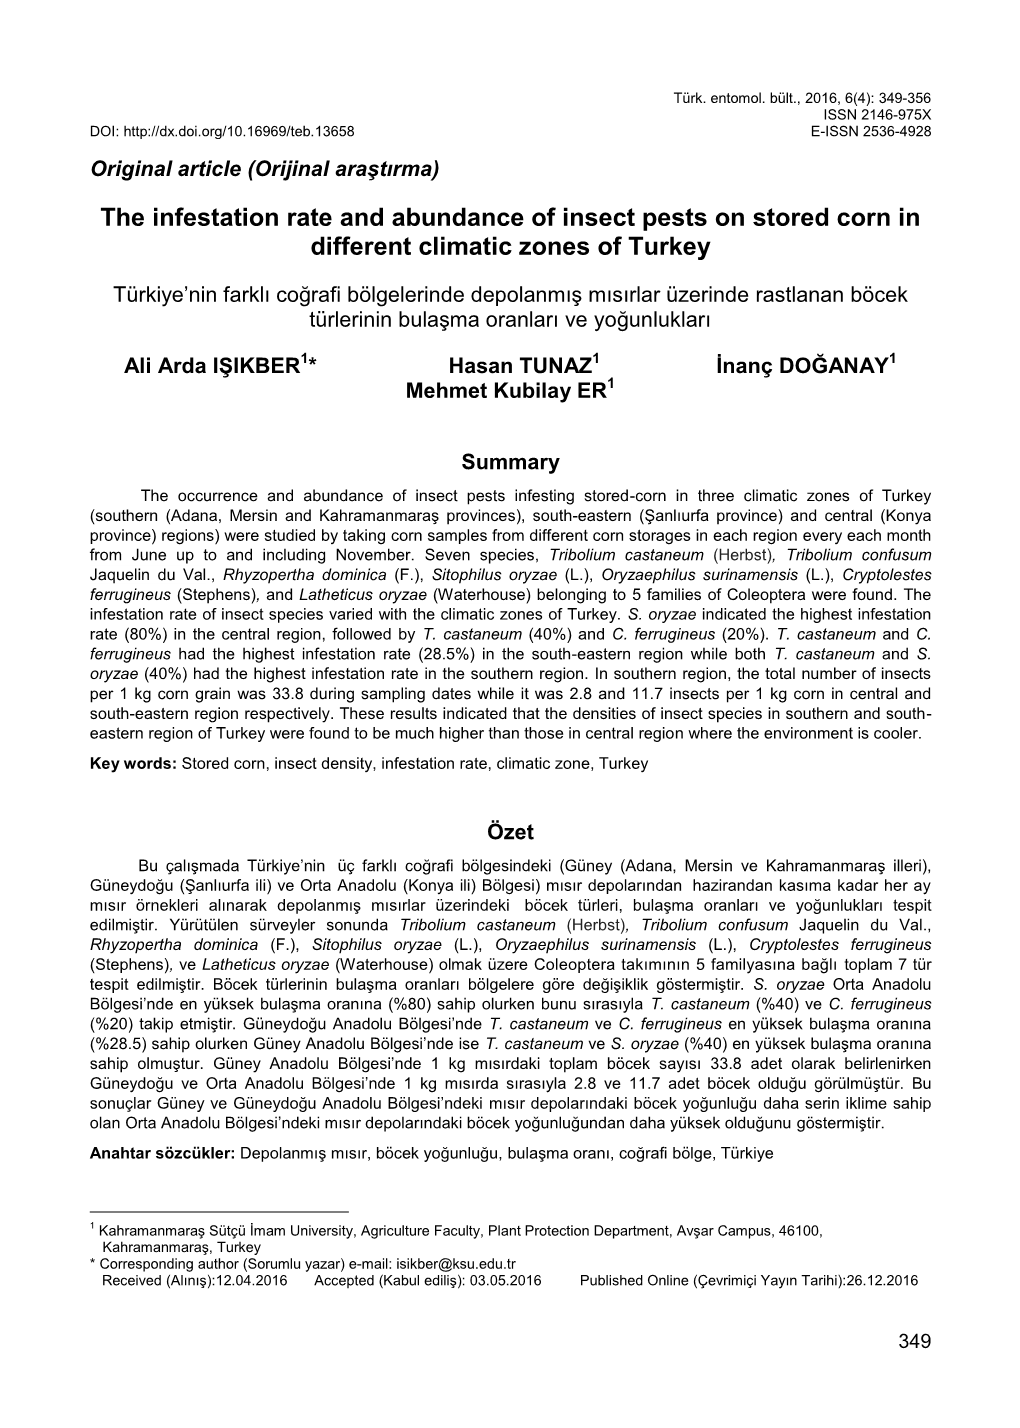 The Infestation Rate and Abundance of Insect Pests on Stored Corn in Different Climatic Zones of Turkey